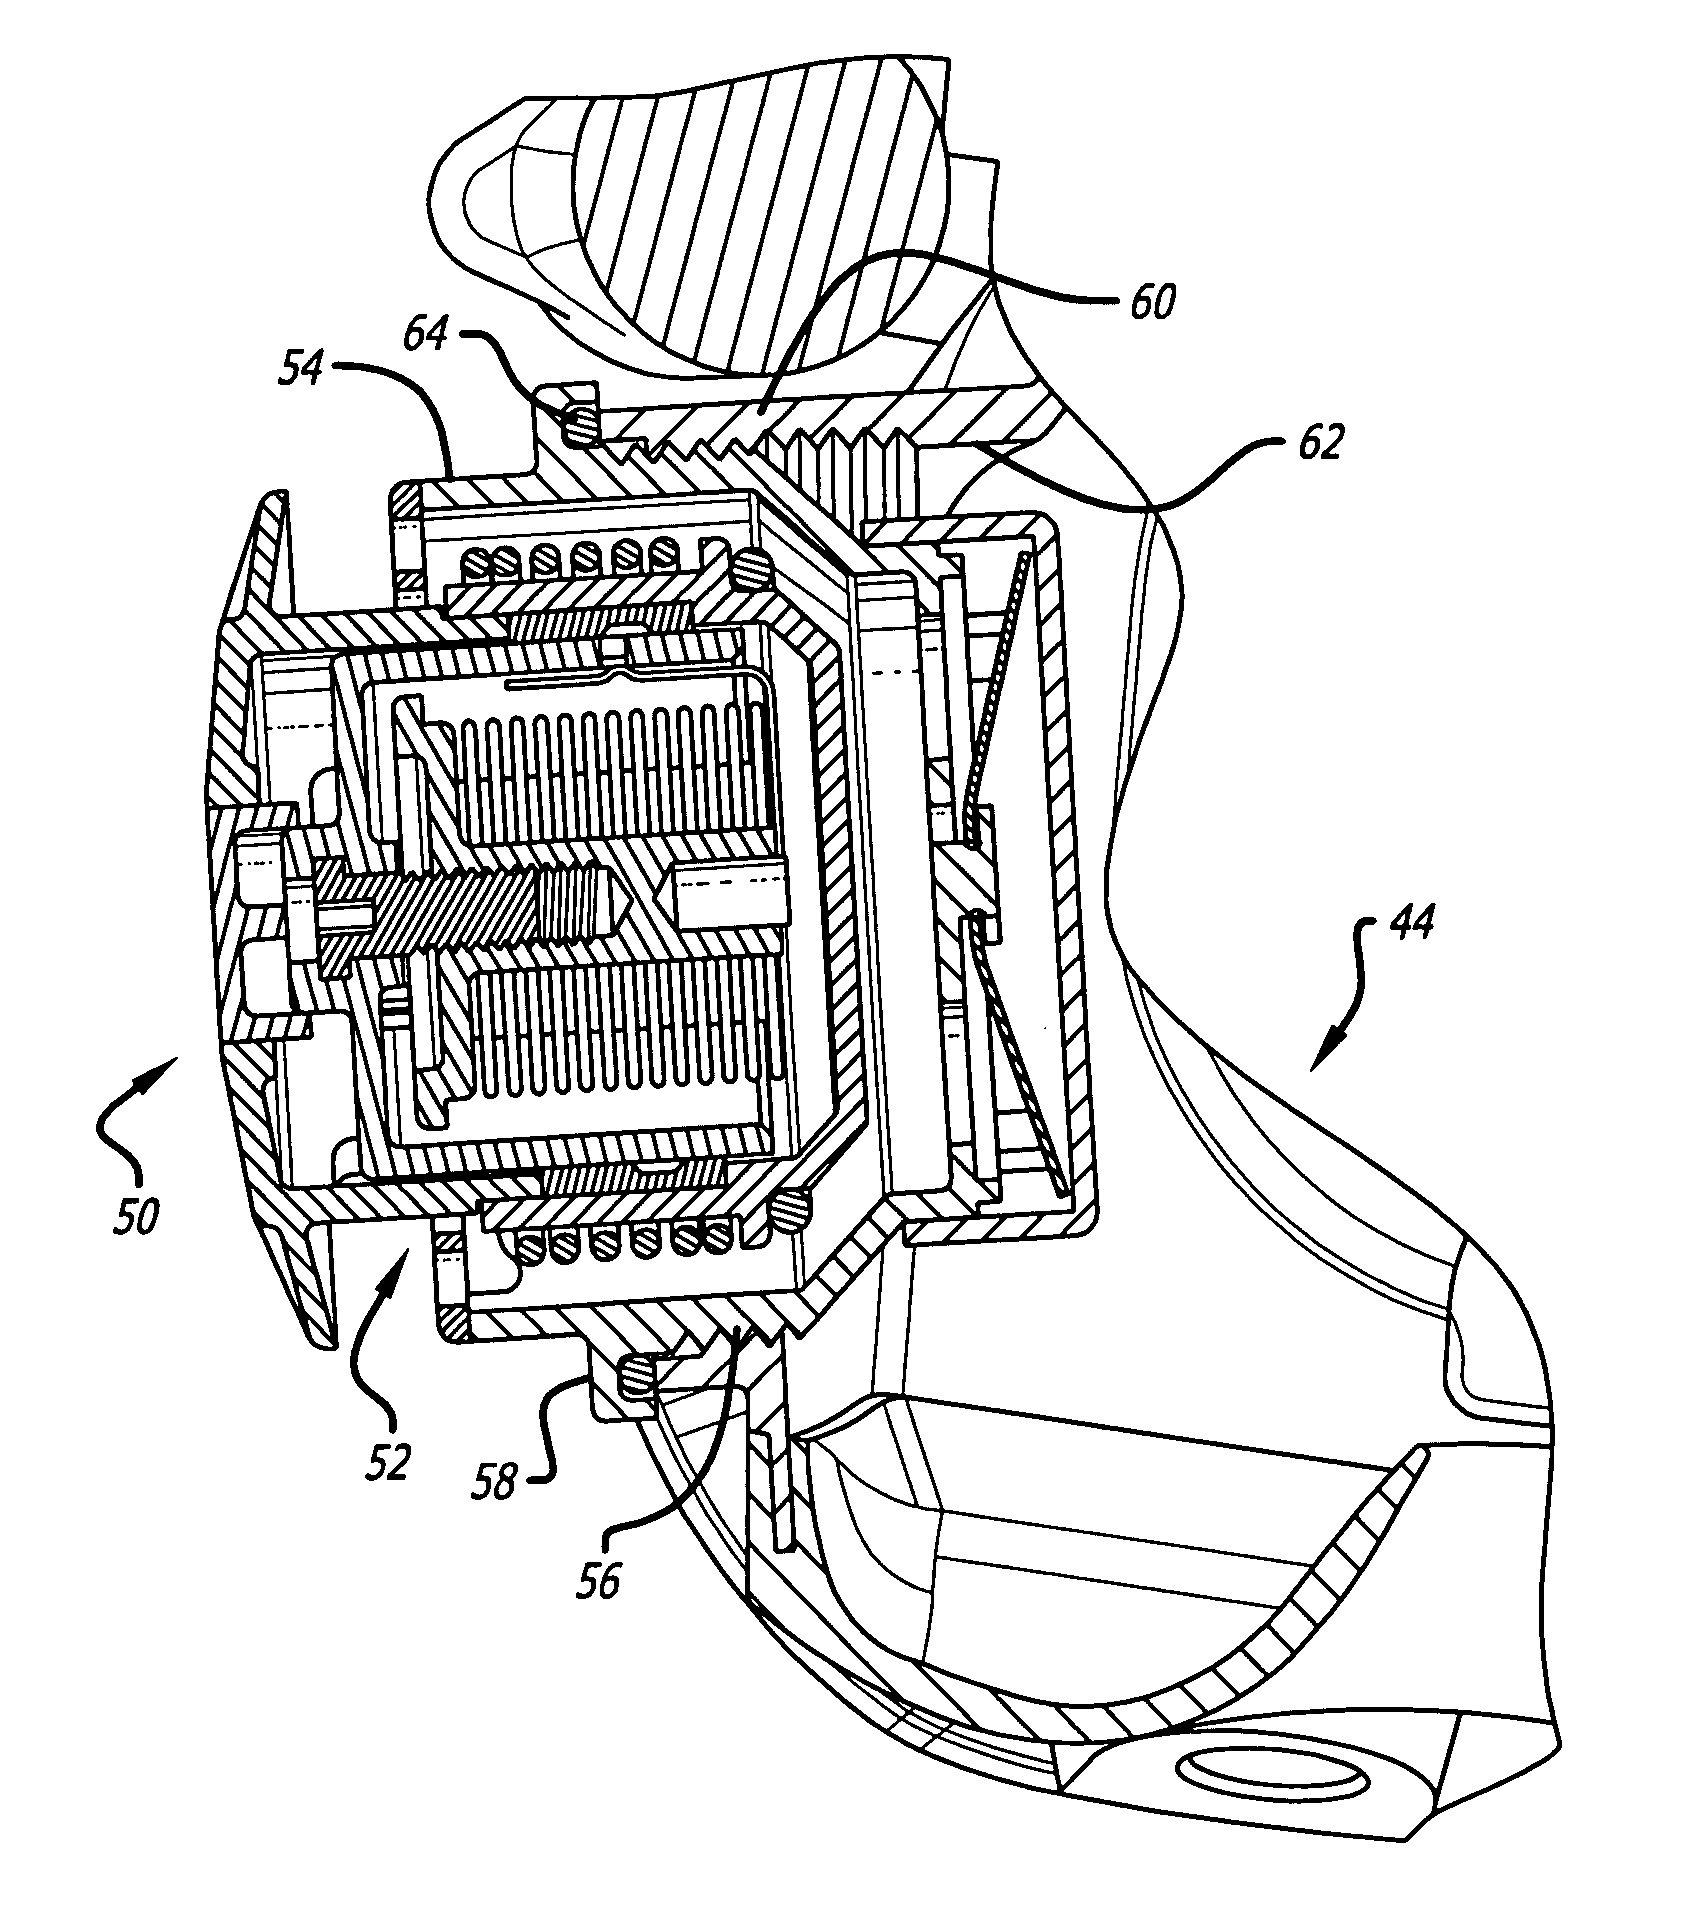 Breathing mask and regulator for aircraft